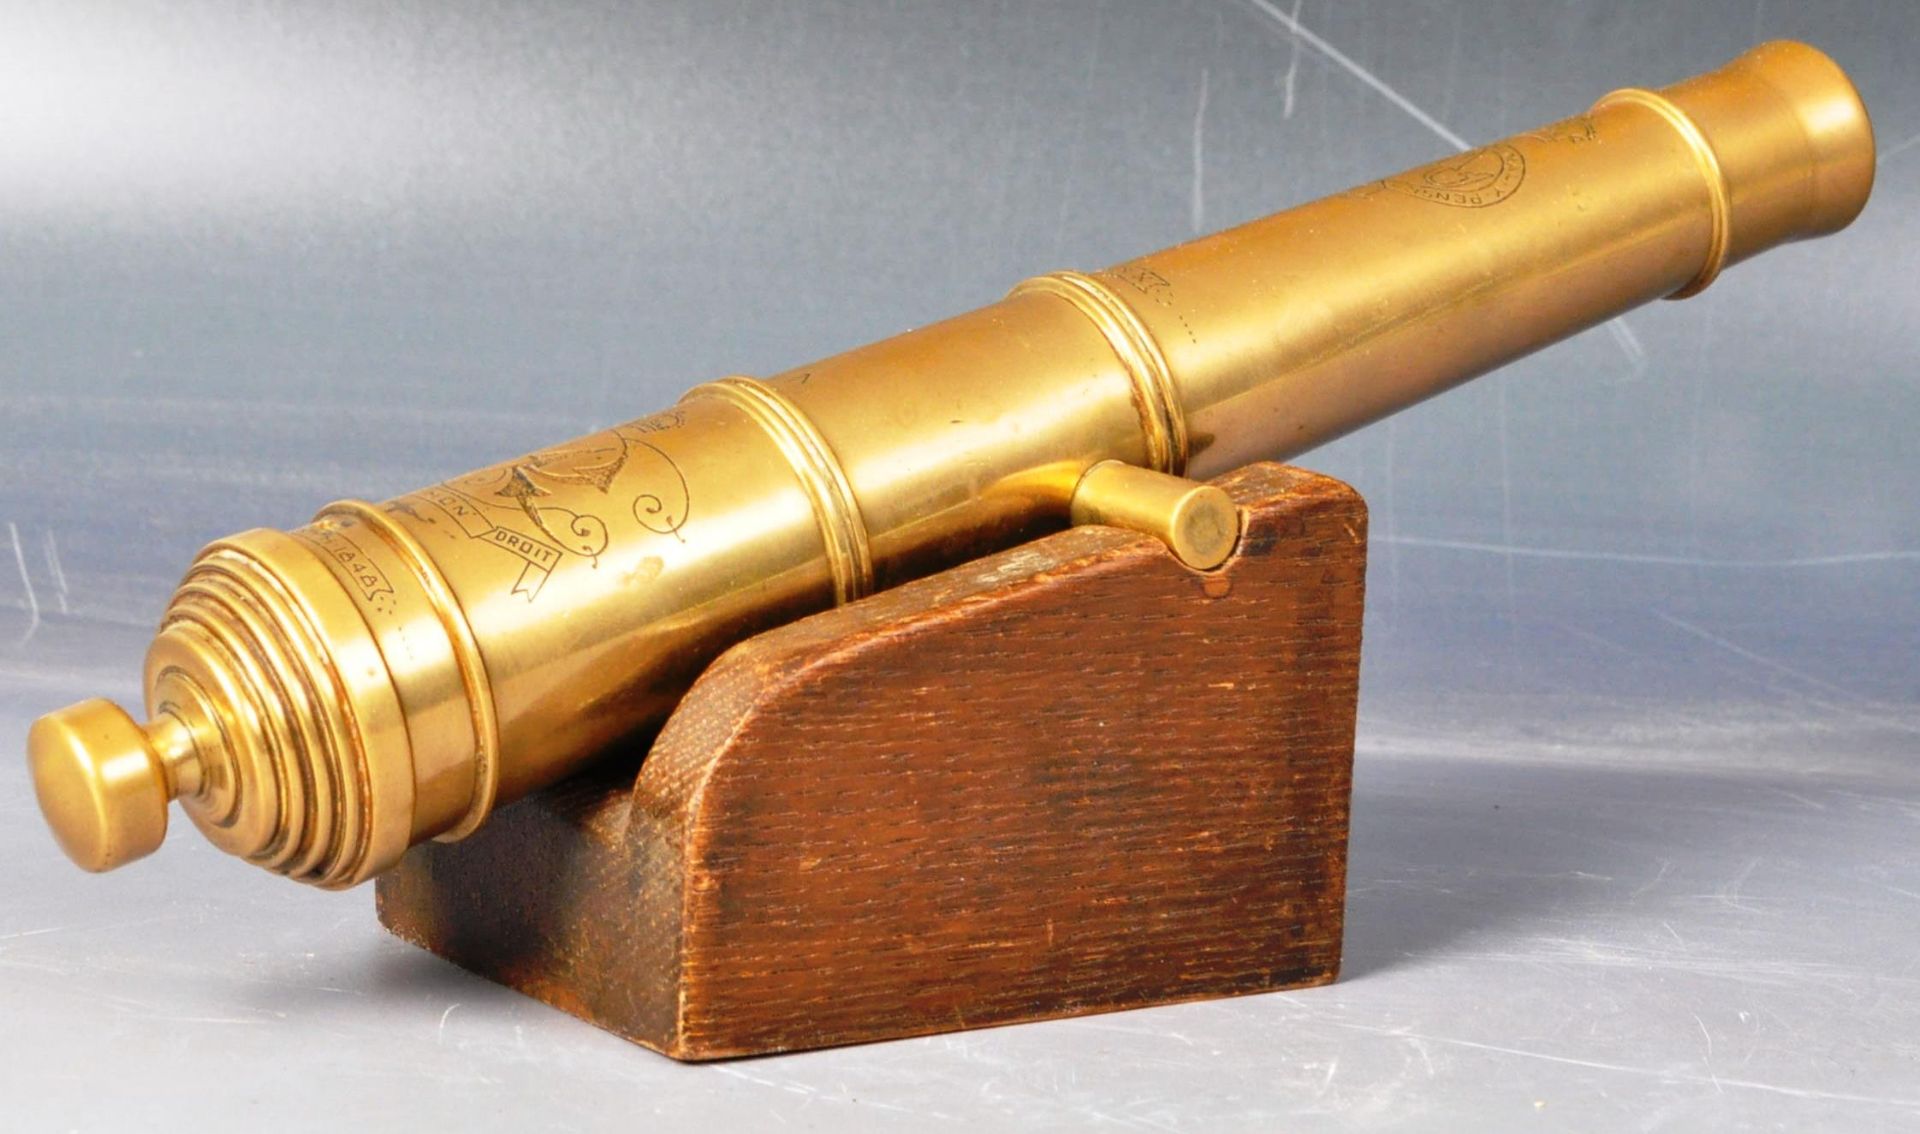 19TH CENTURY VICTORIAN GILDED BRONZE CANNON ON STAND